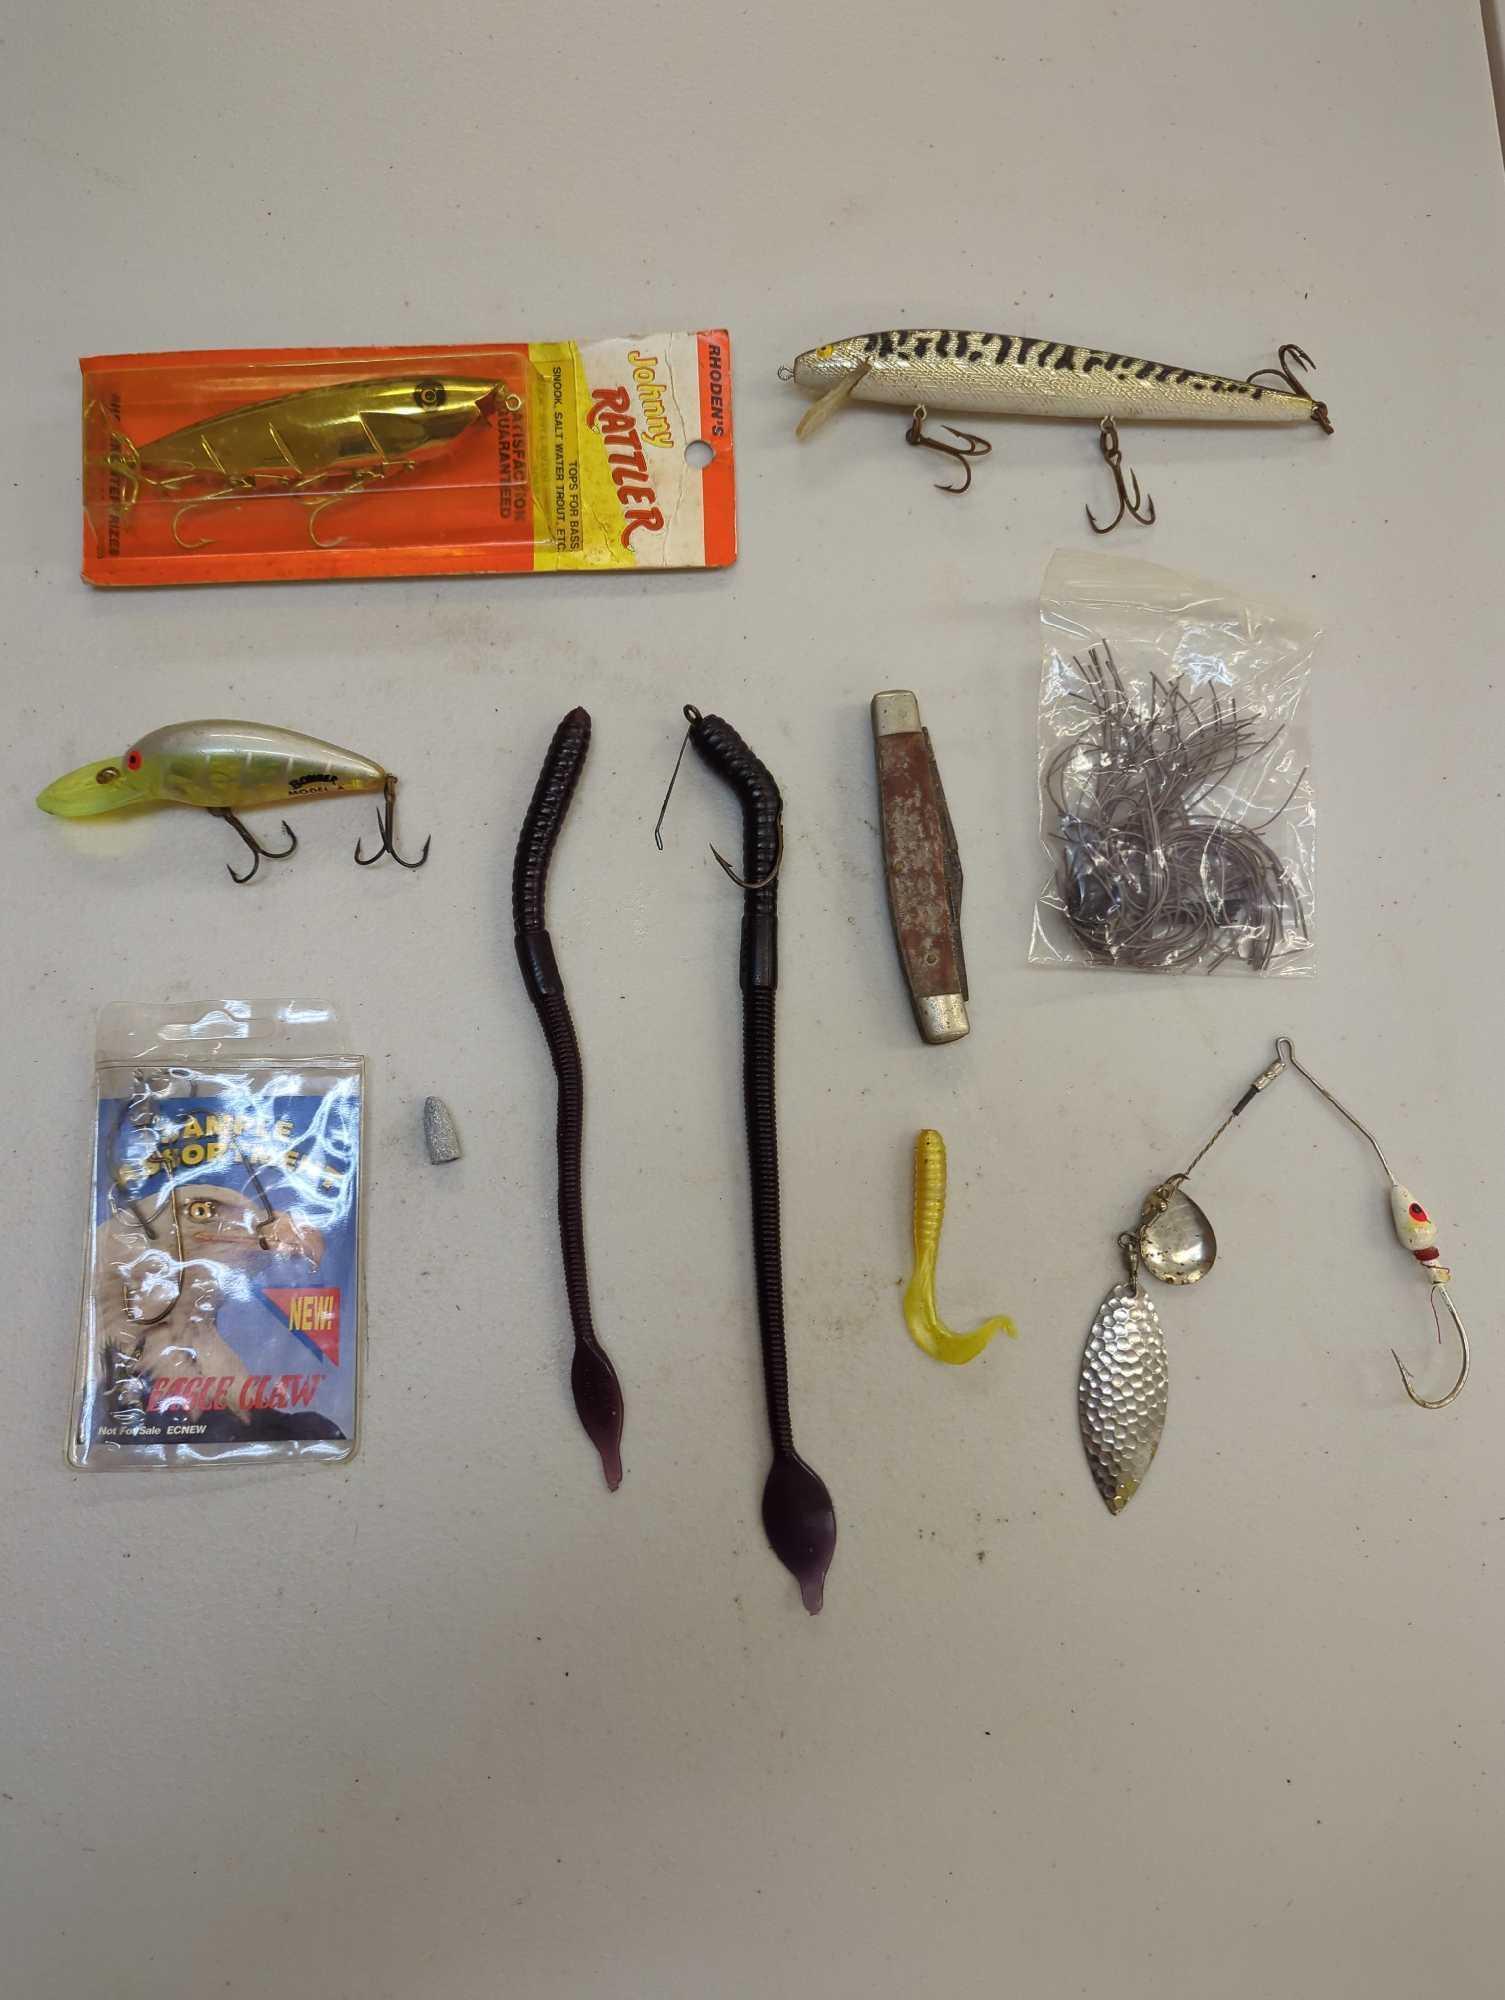 Dual-sided Tackle Box and contents including fishing accessories, various worms, and many other